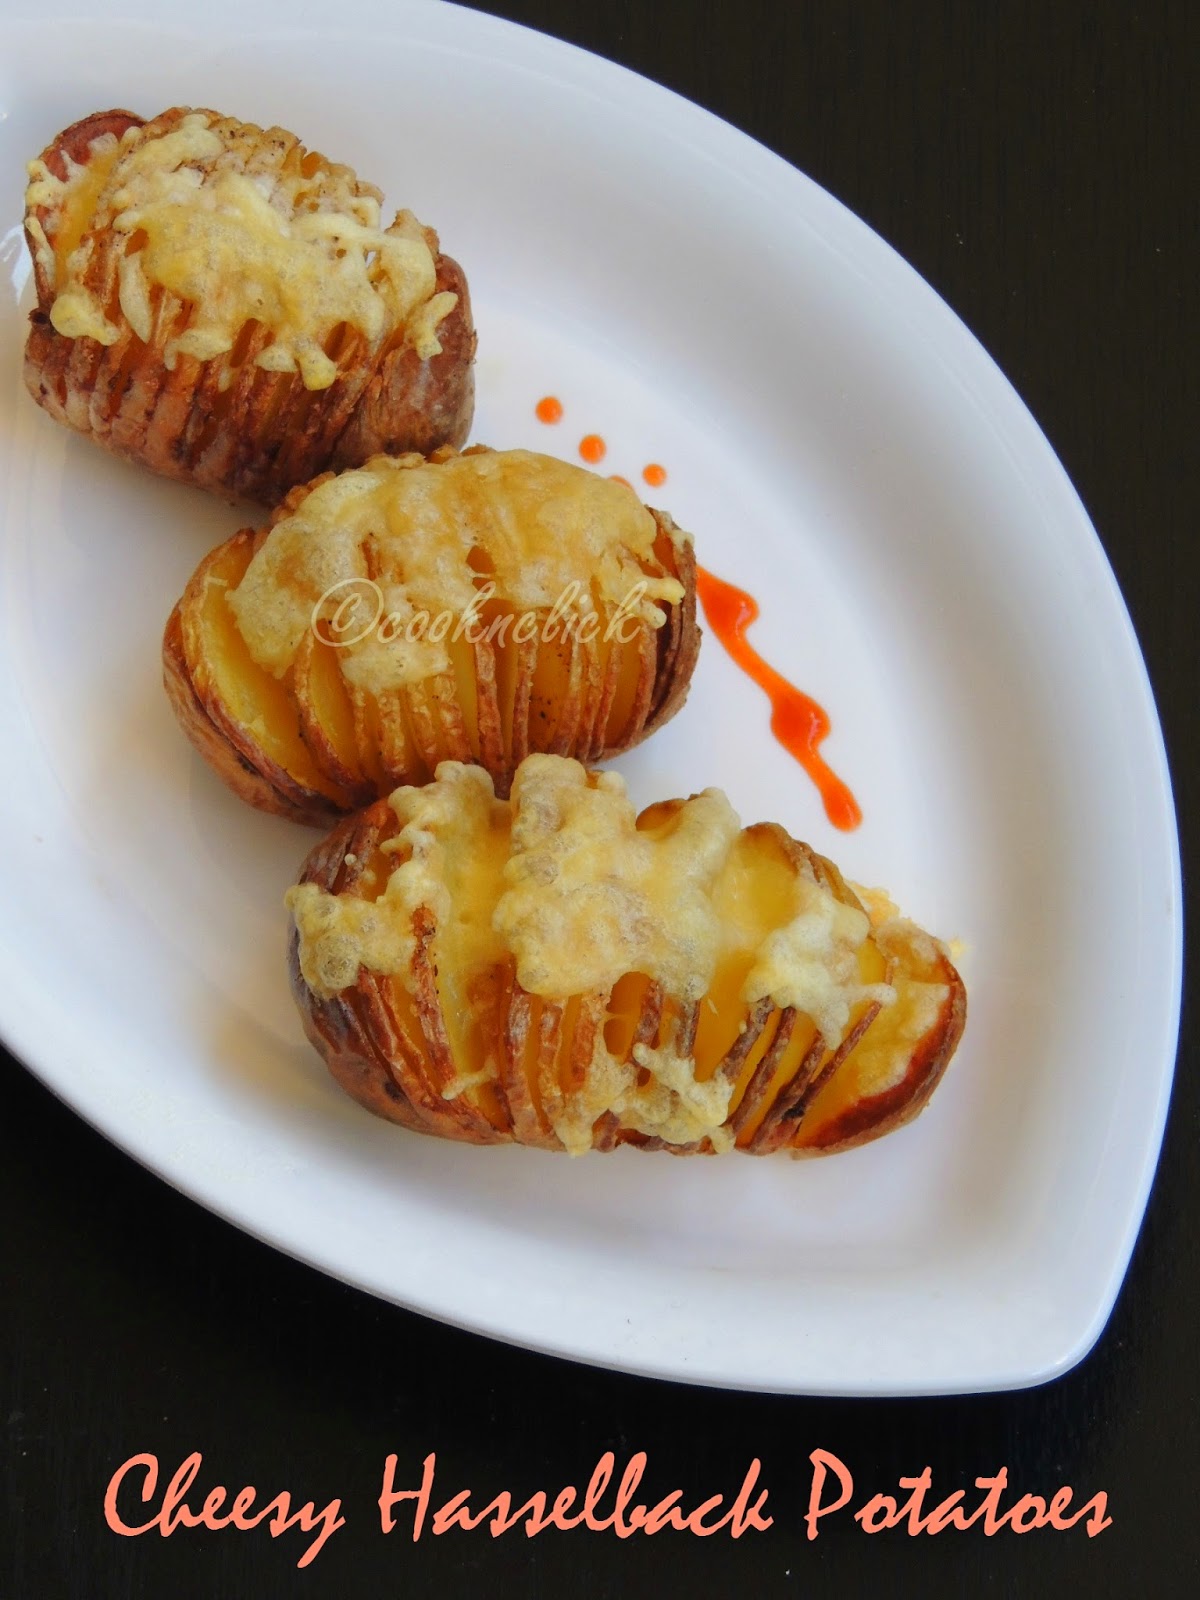 Hasselback potatoes with emmental cheese